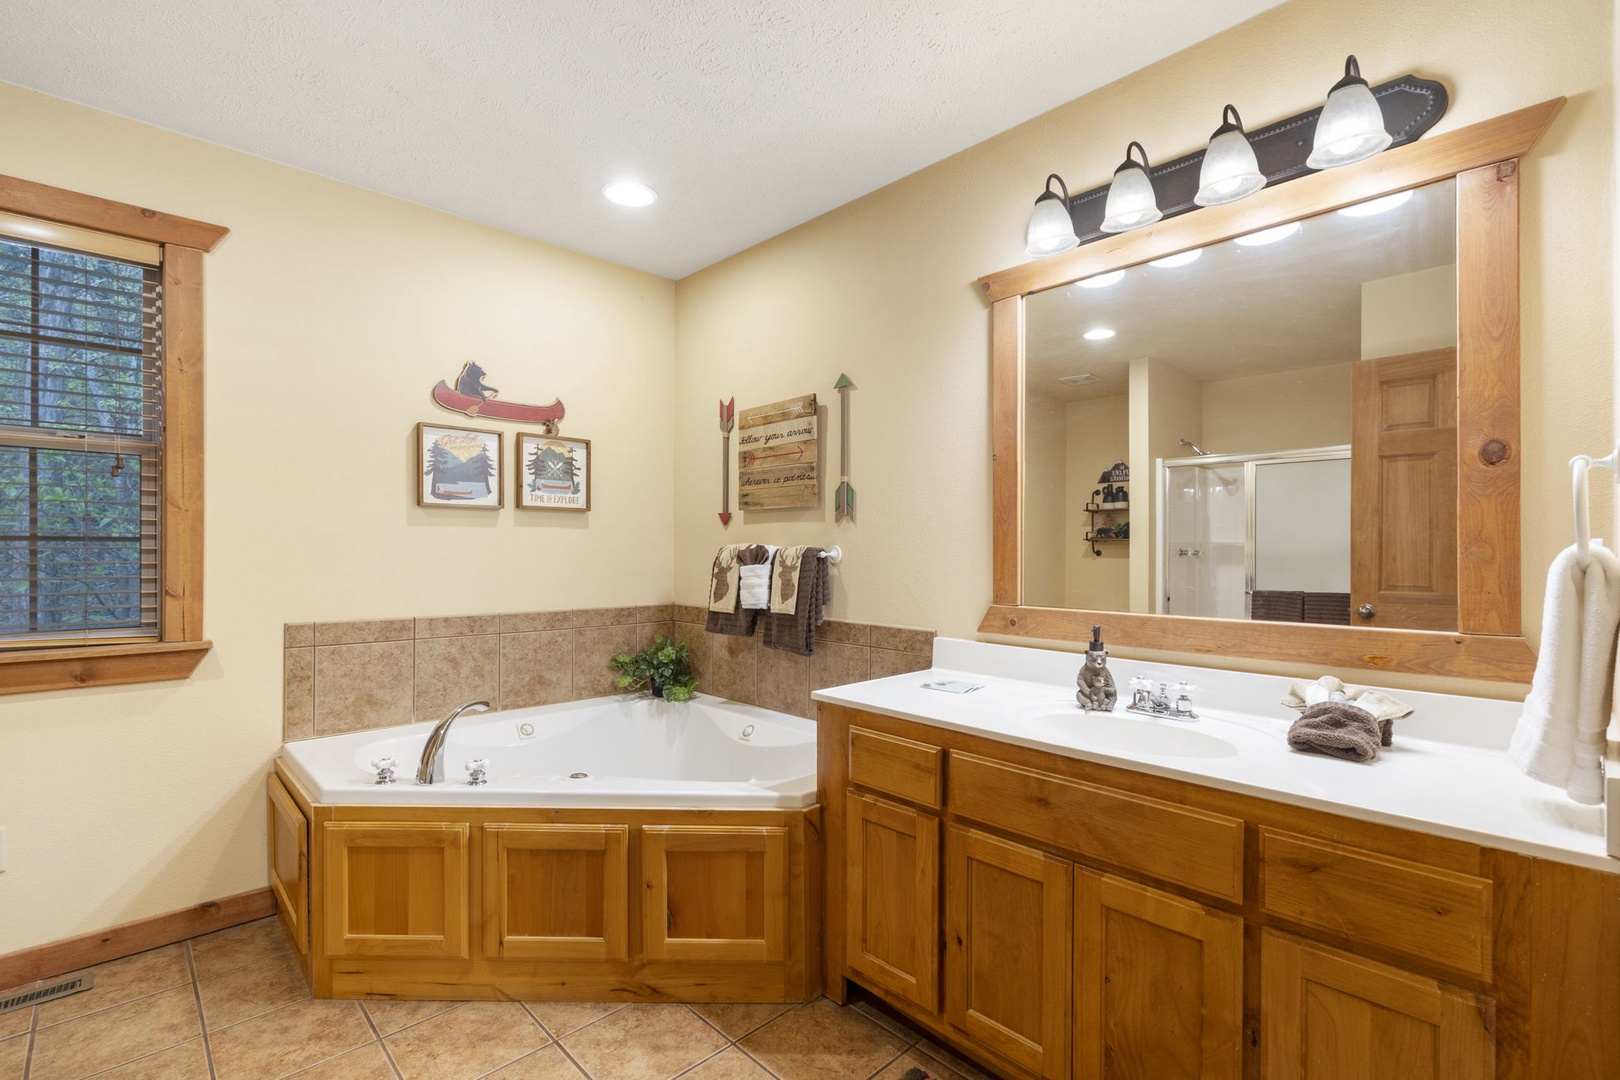 This king ensuite includes a large vanity, glass shower, & luxurious jetted tub